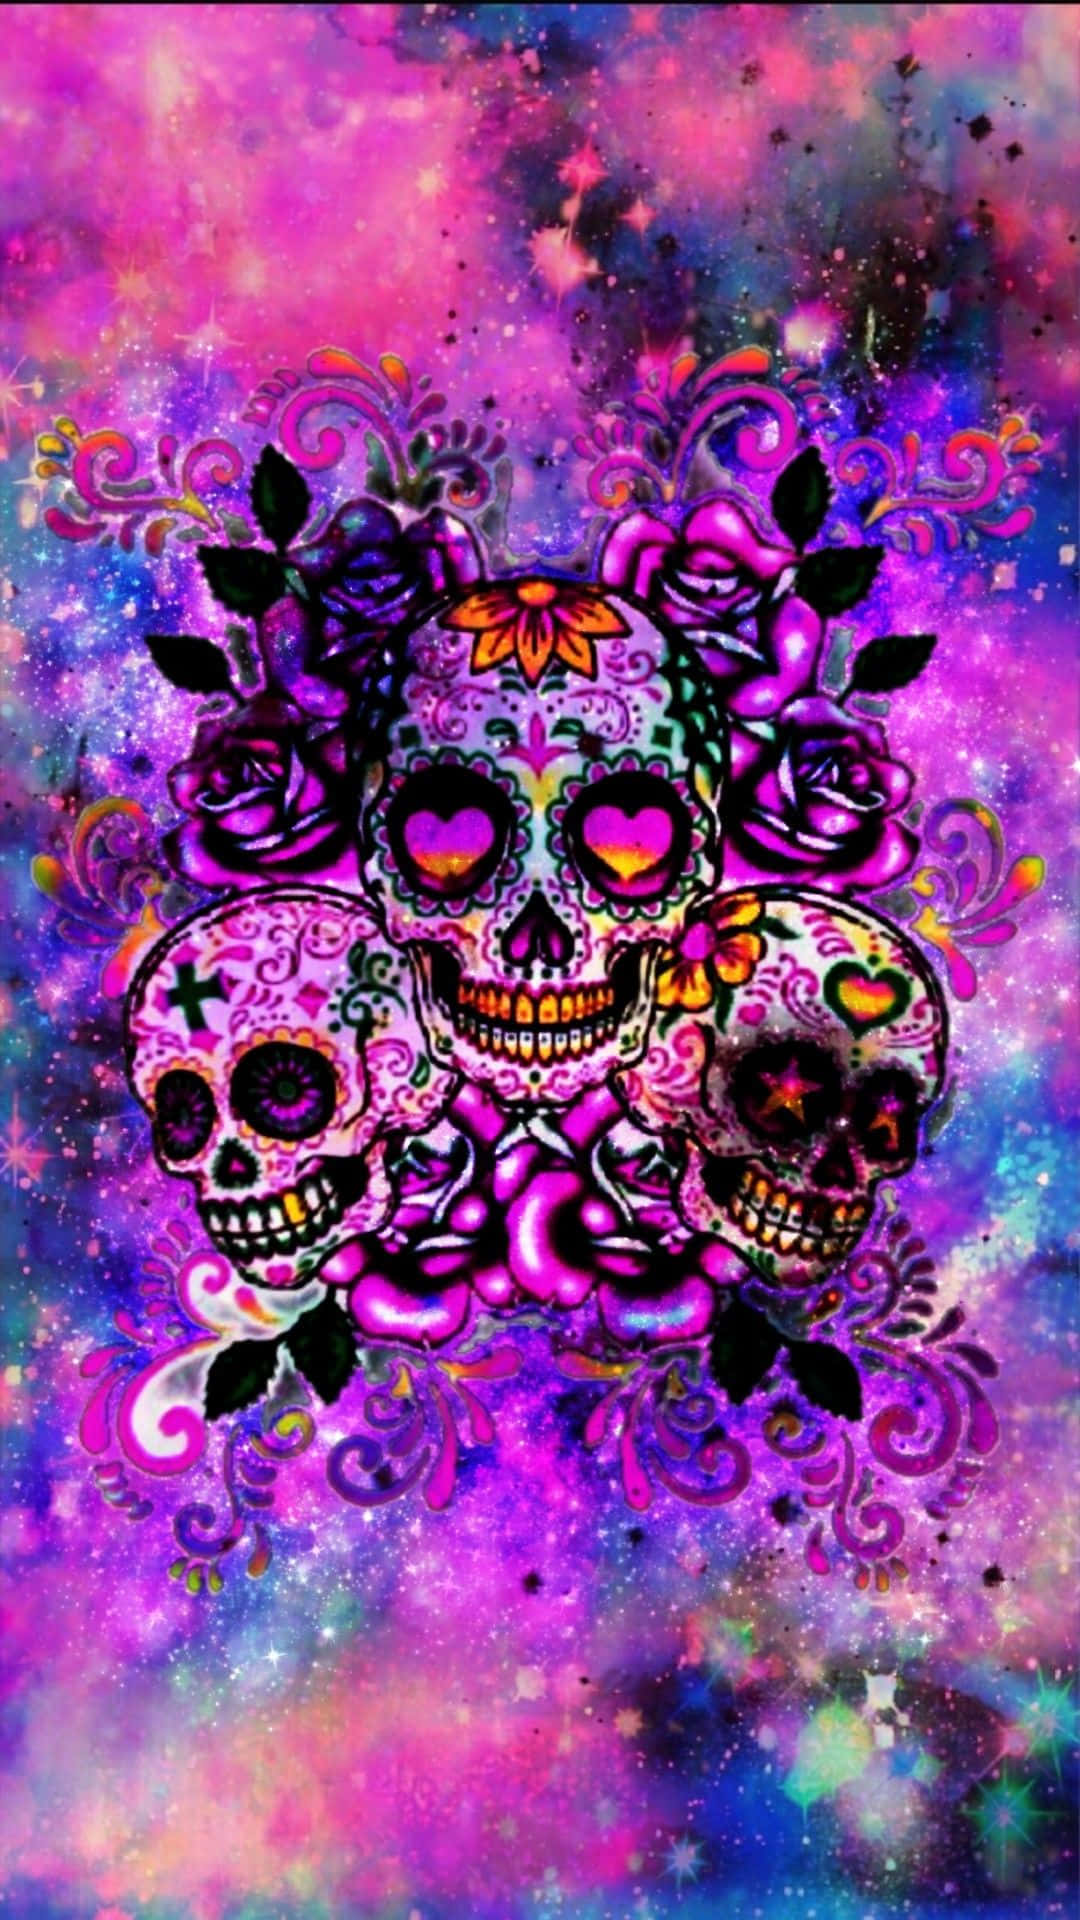 Keep in touch with a flavorful flair by using a Sugar Skull Phone! Wallpaper